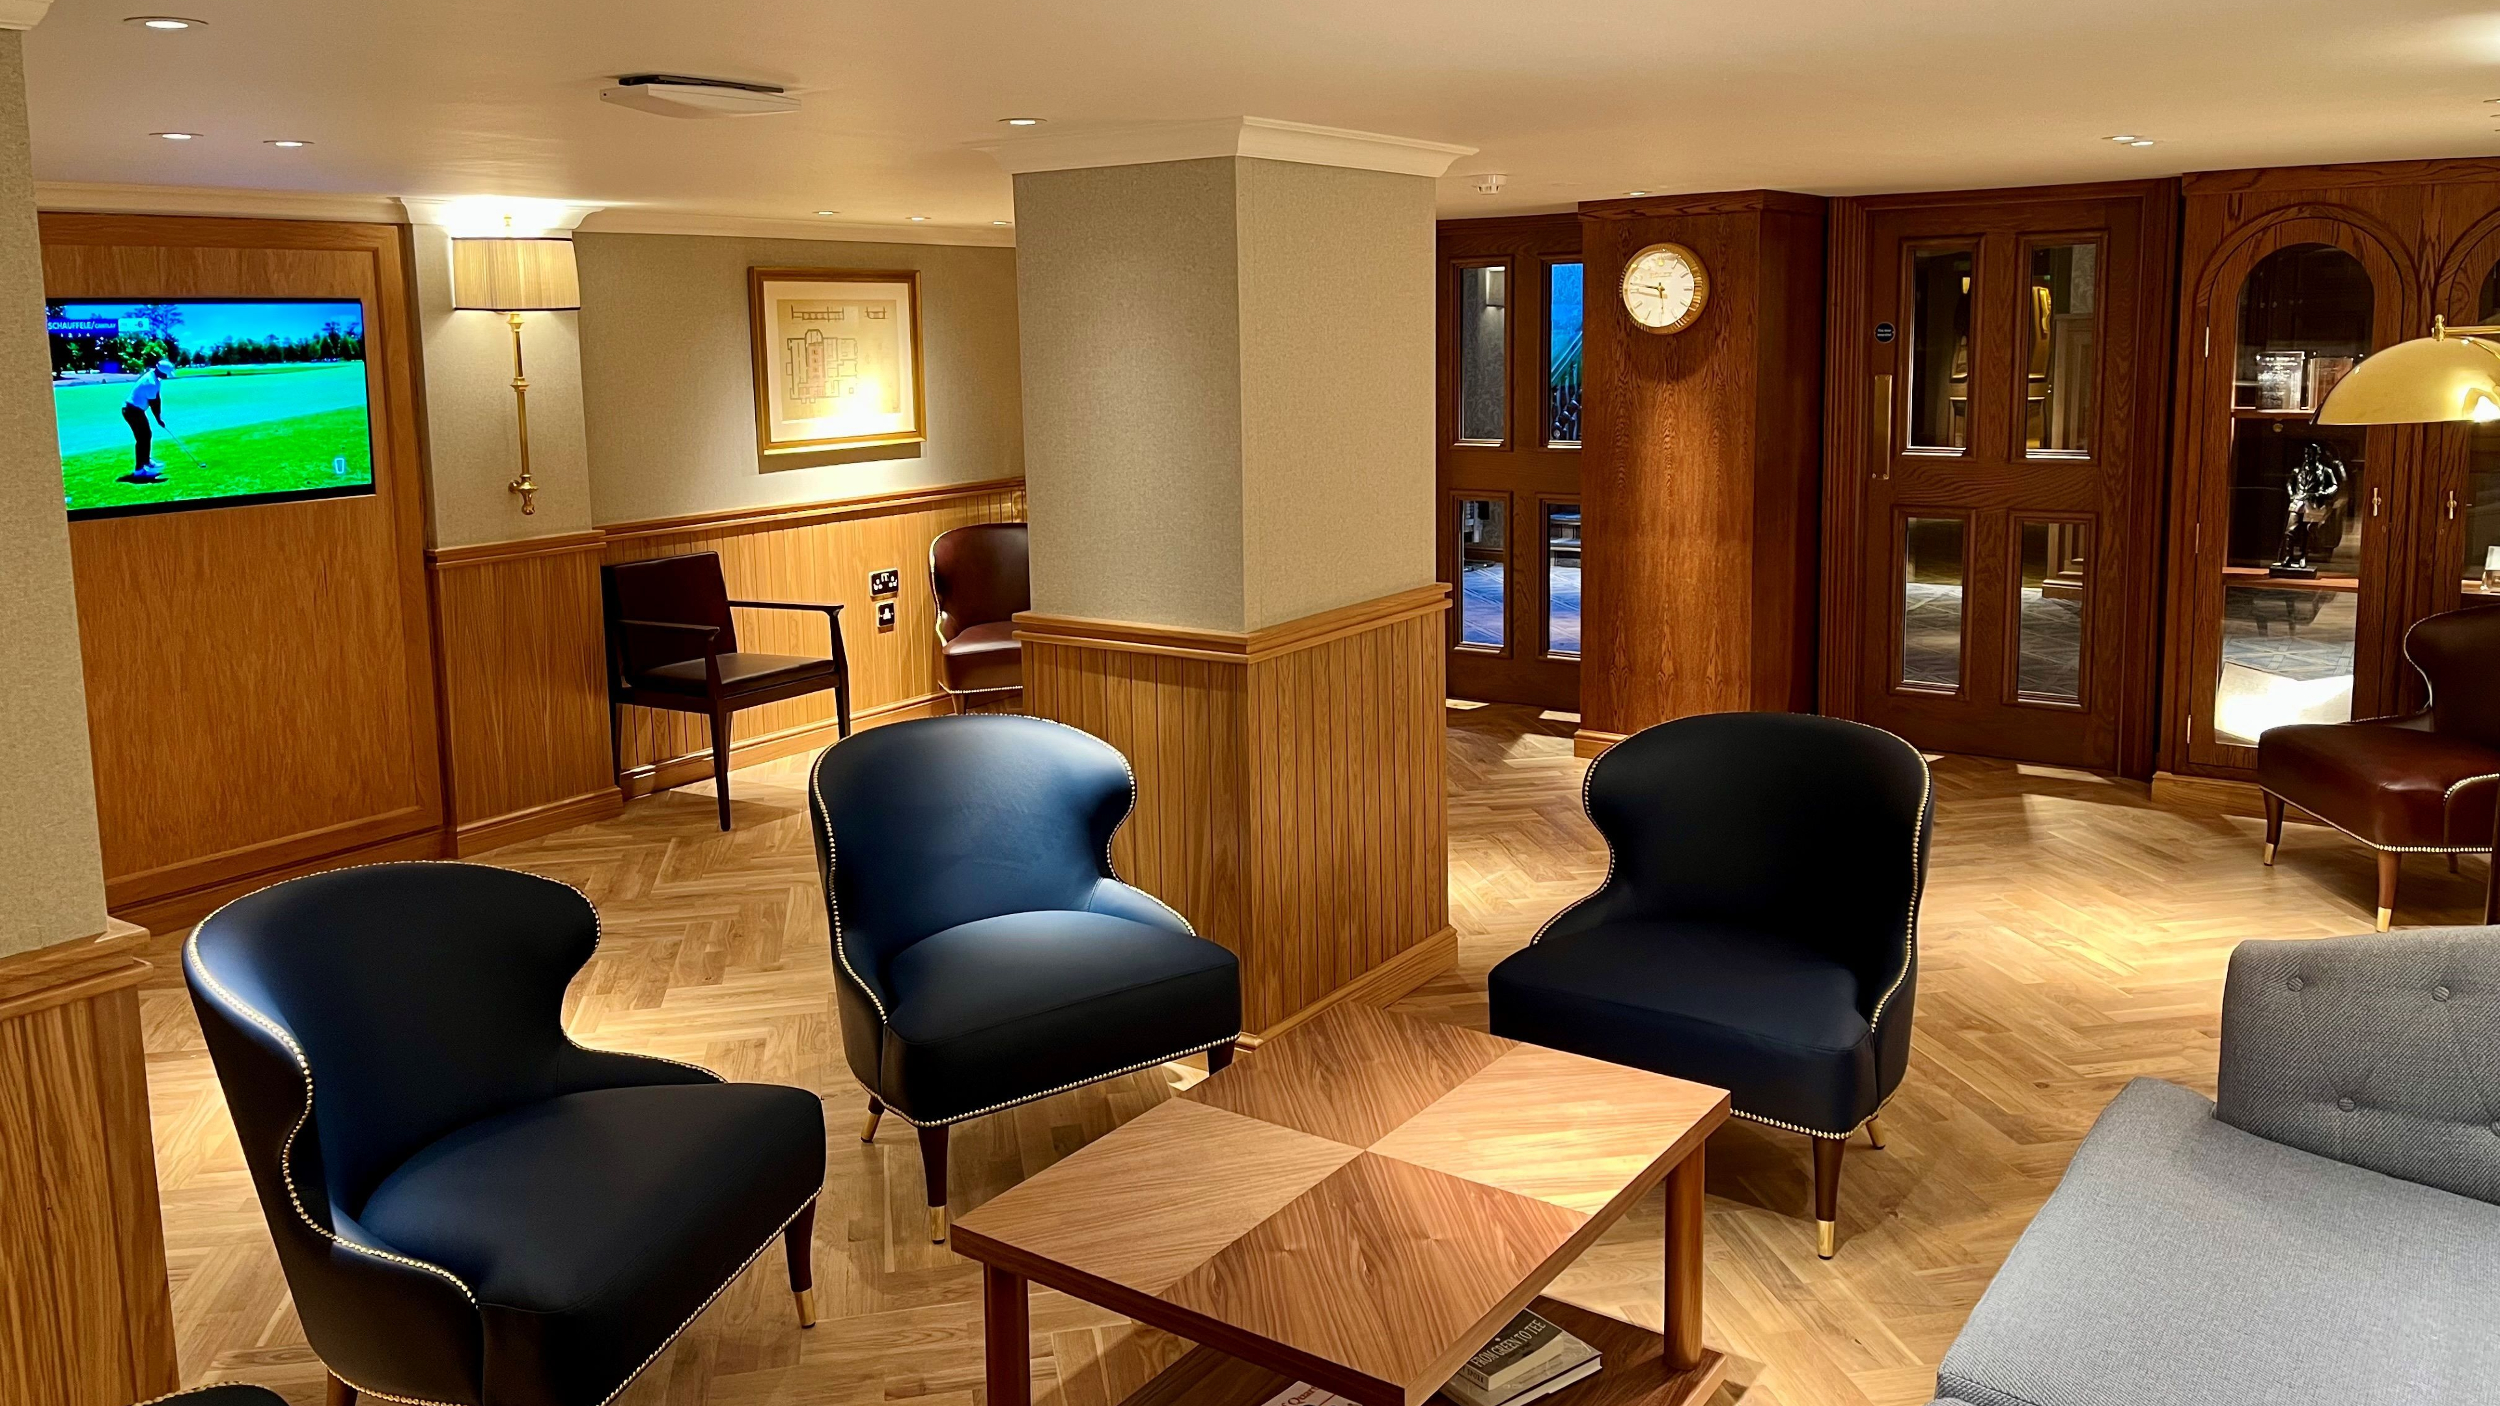 inside the r&a clubhouse (after its £11m renovation)... here's what it looks like